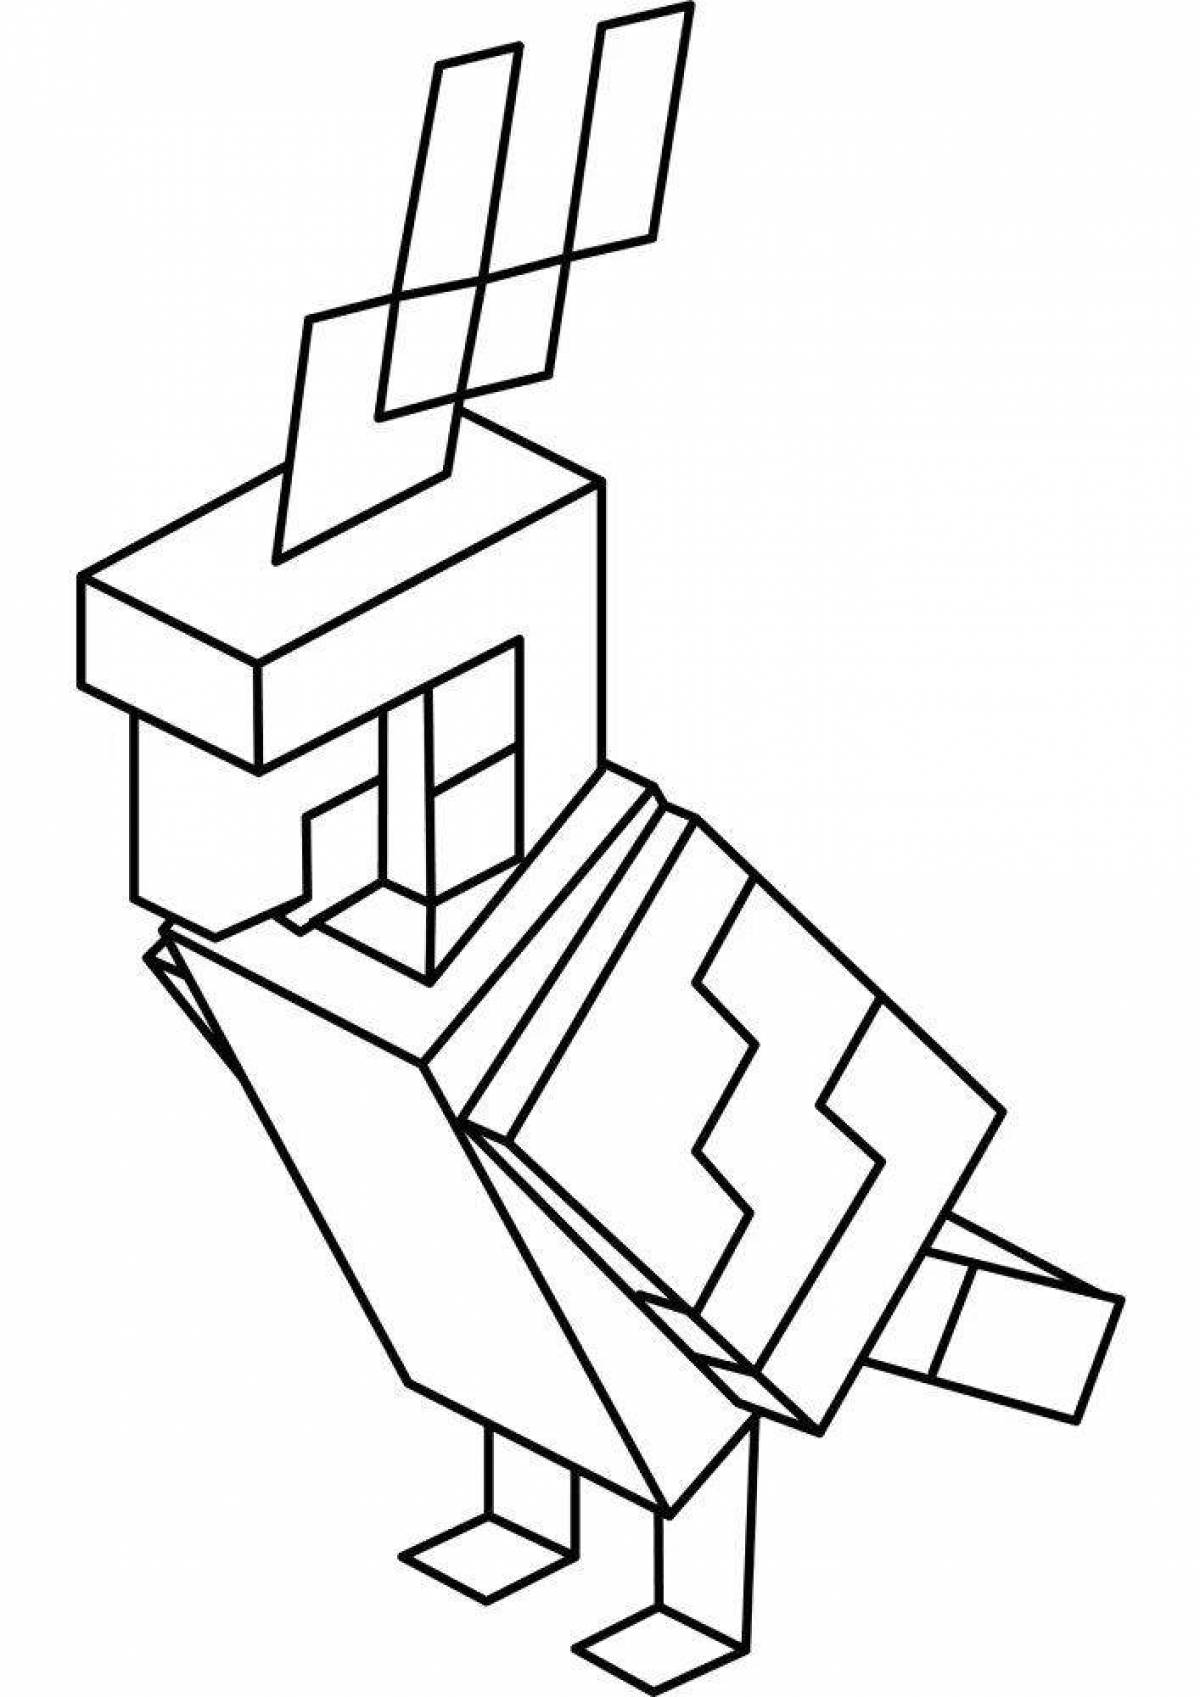 Funny minecraft cat coloring page